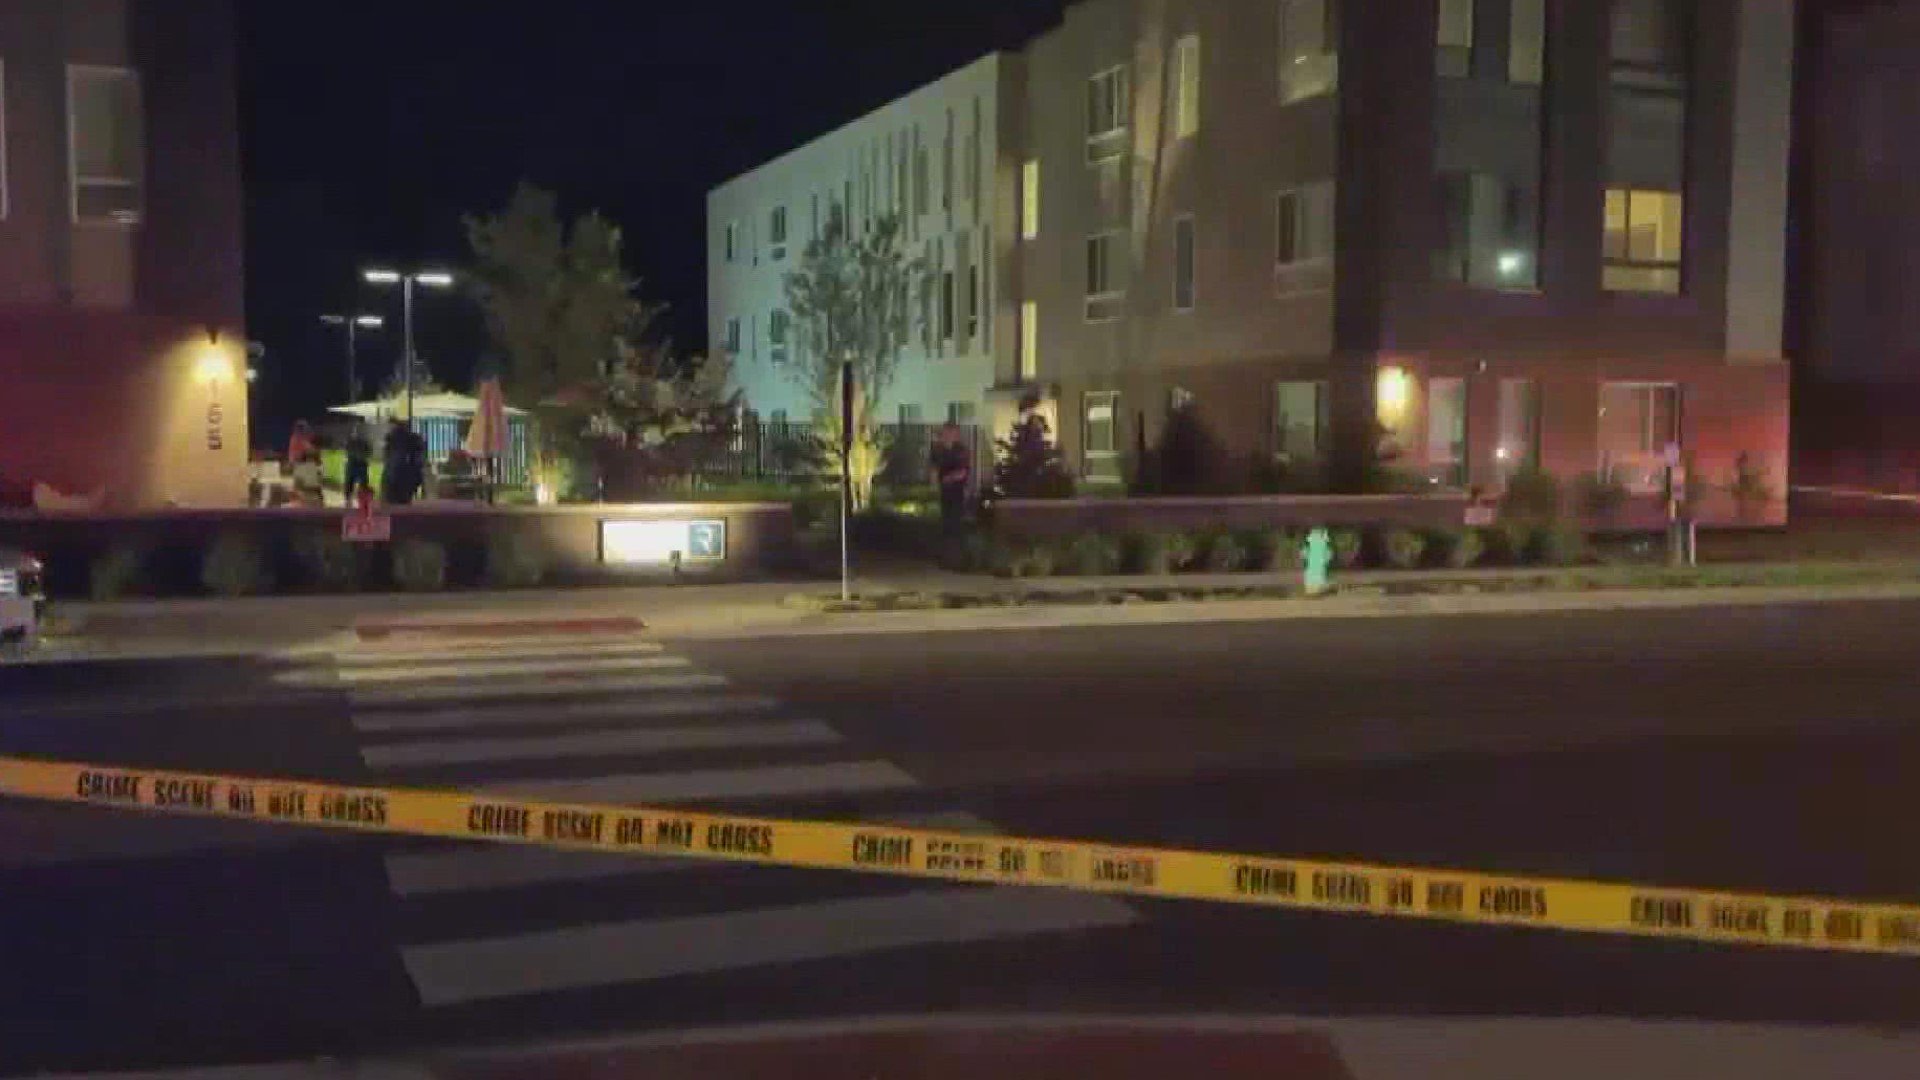 IMPD is conducting a death investigation after a man was found shot outside an apartment complex on the northeast side of Indianapolis early Saturday.